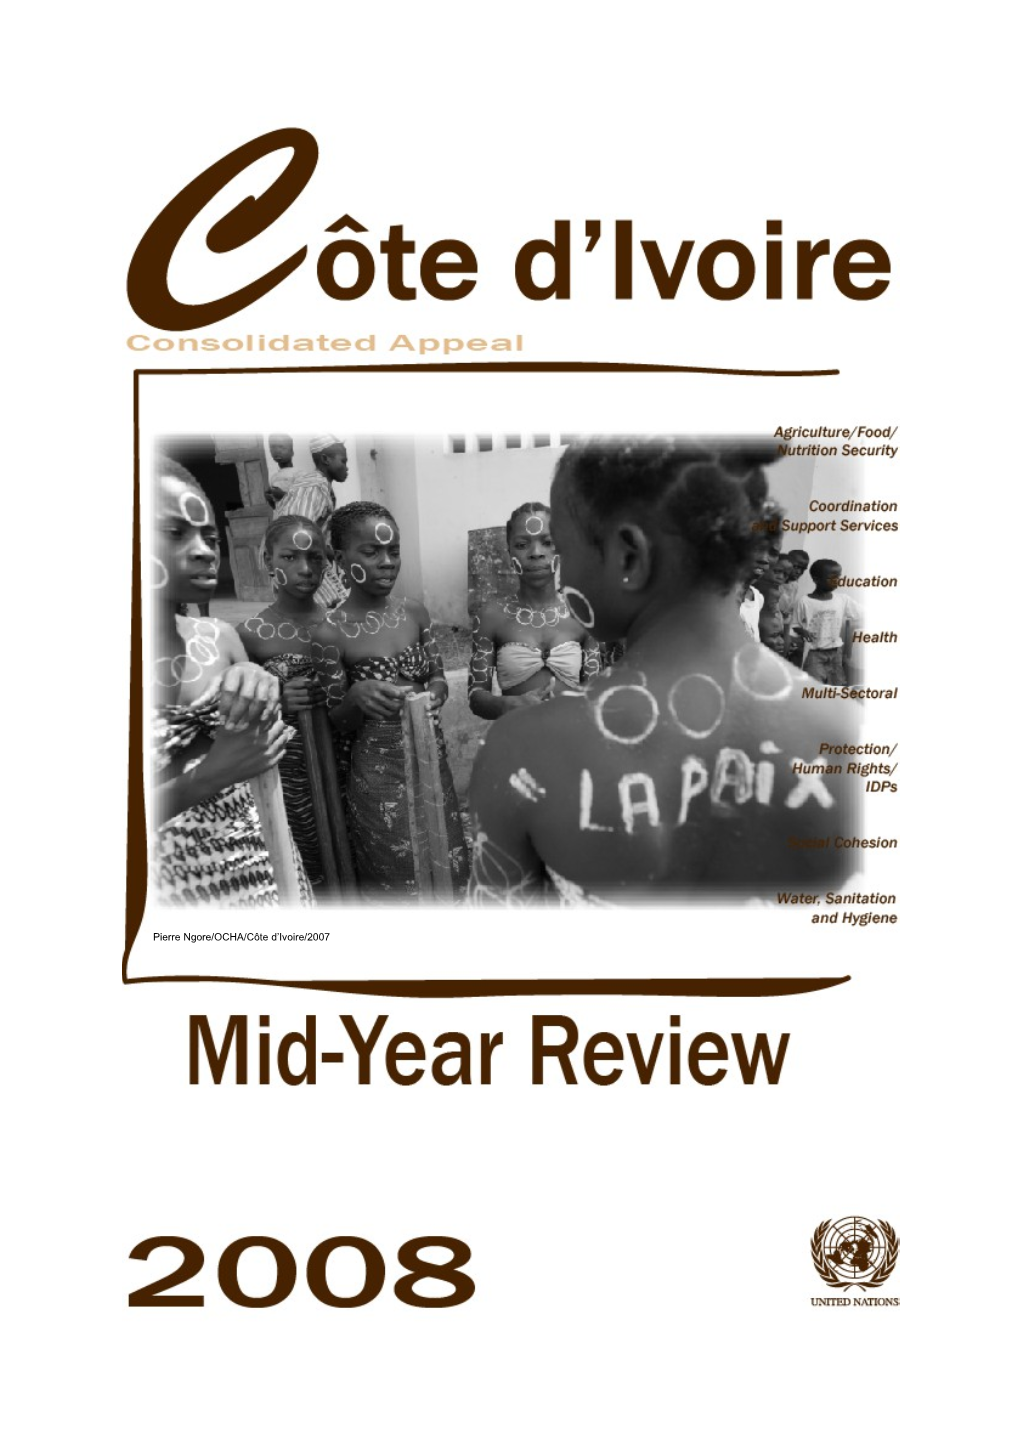 Mid-Year Review of the Consolidated Appeal for Cote D'ivoire 2008 (Word)